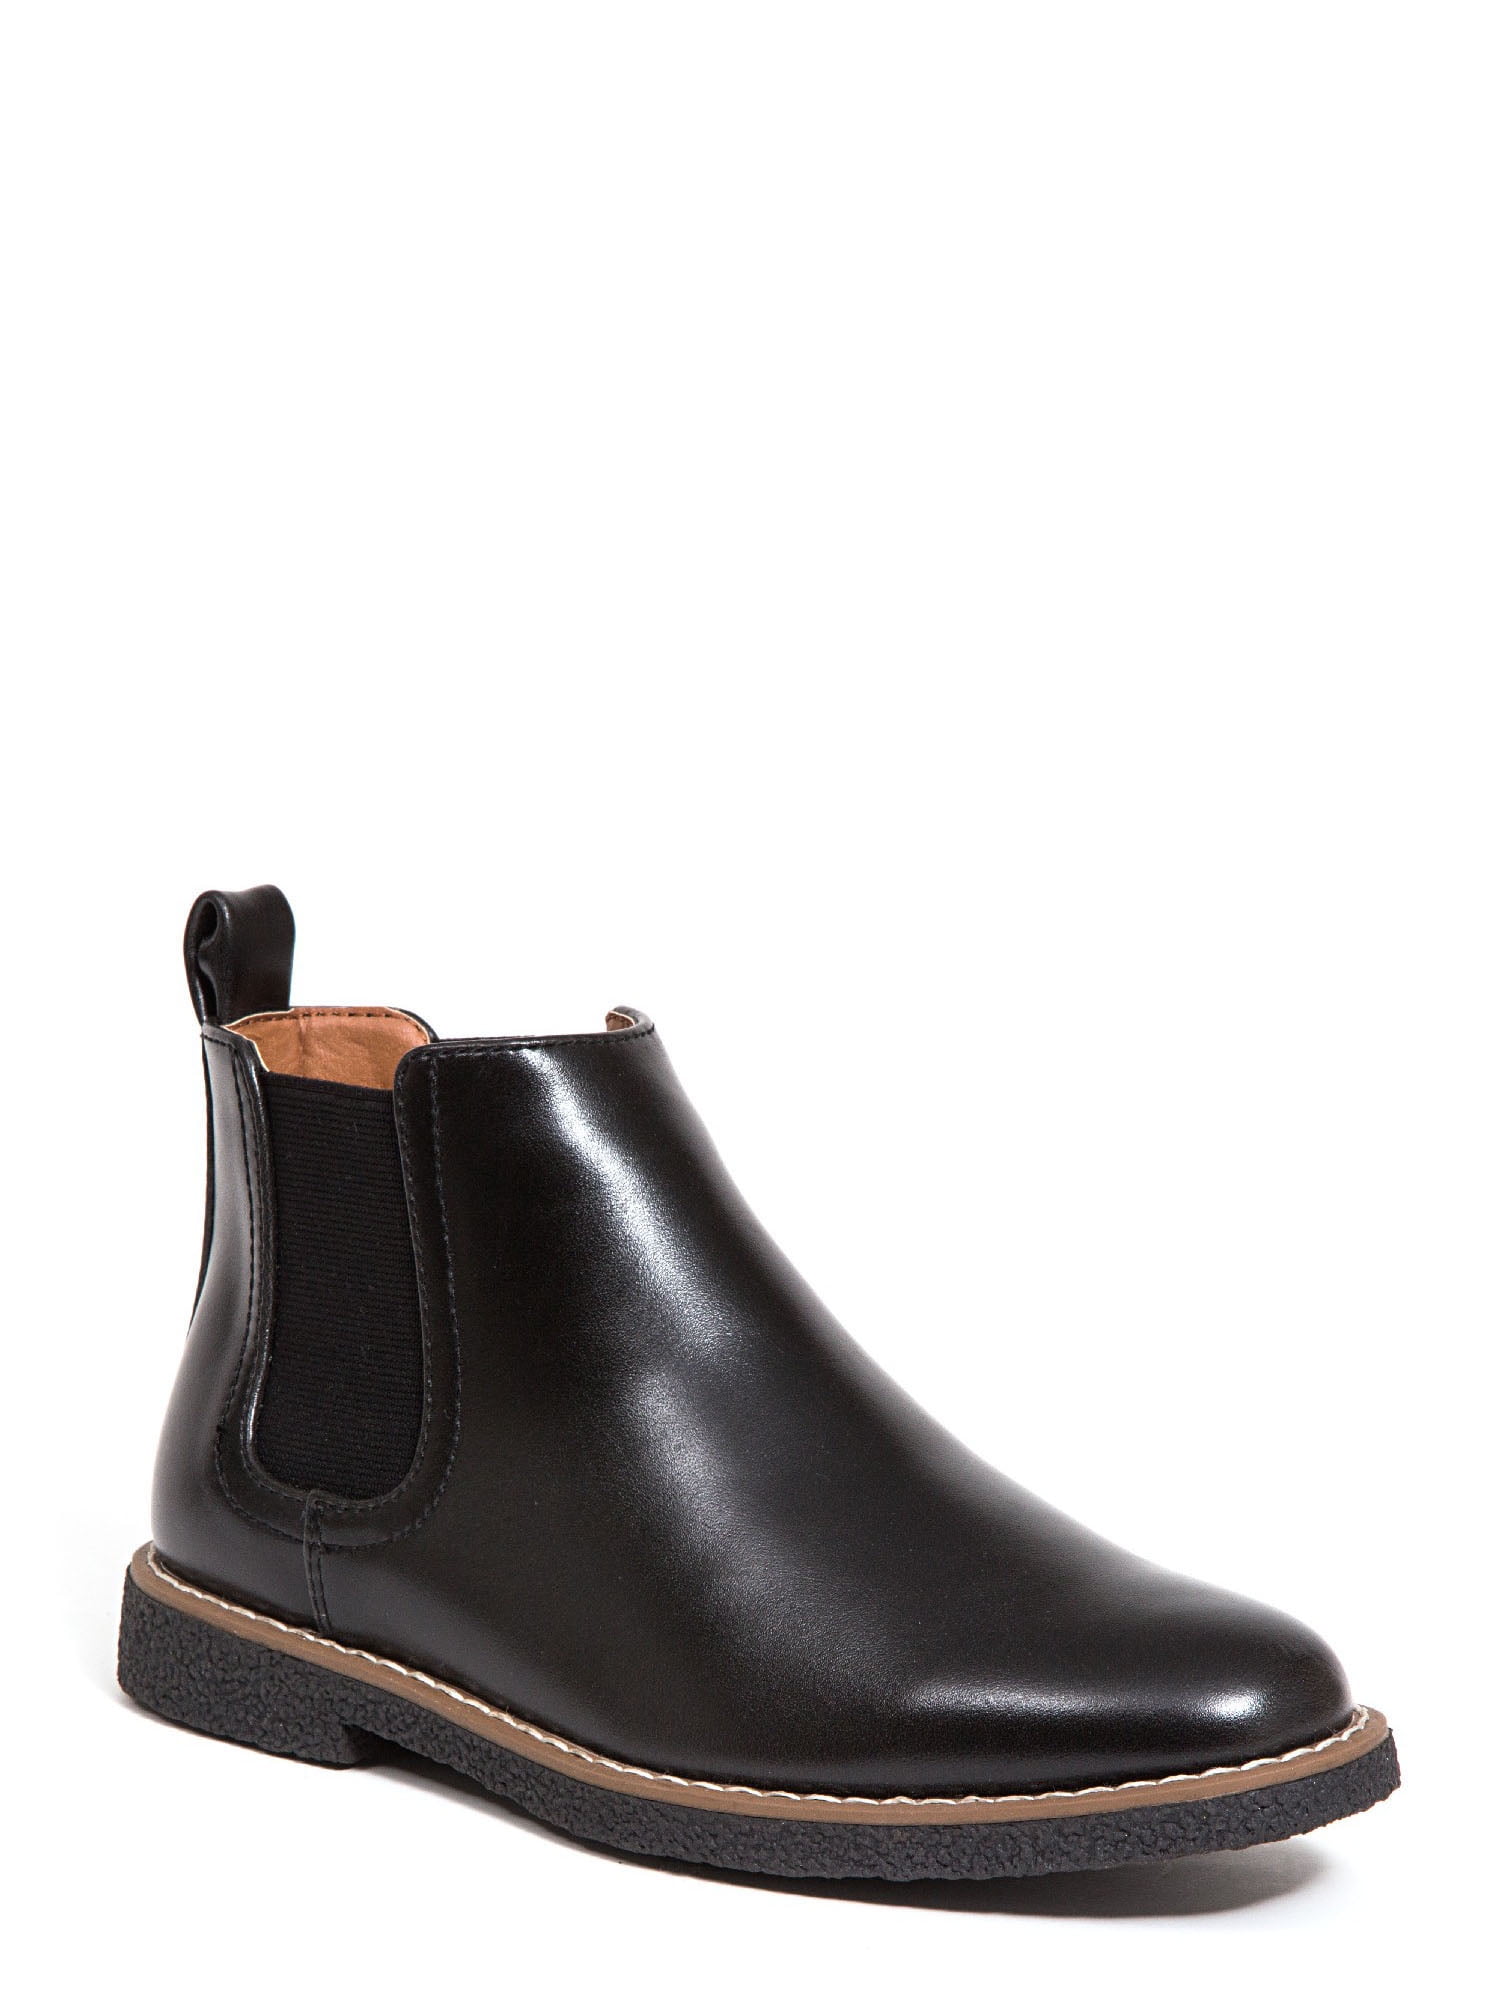 Boys' Deer Stags Zane Chelsea Boot Black/Black Simulated Leather 4 M ...